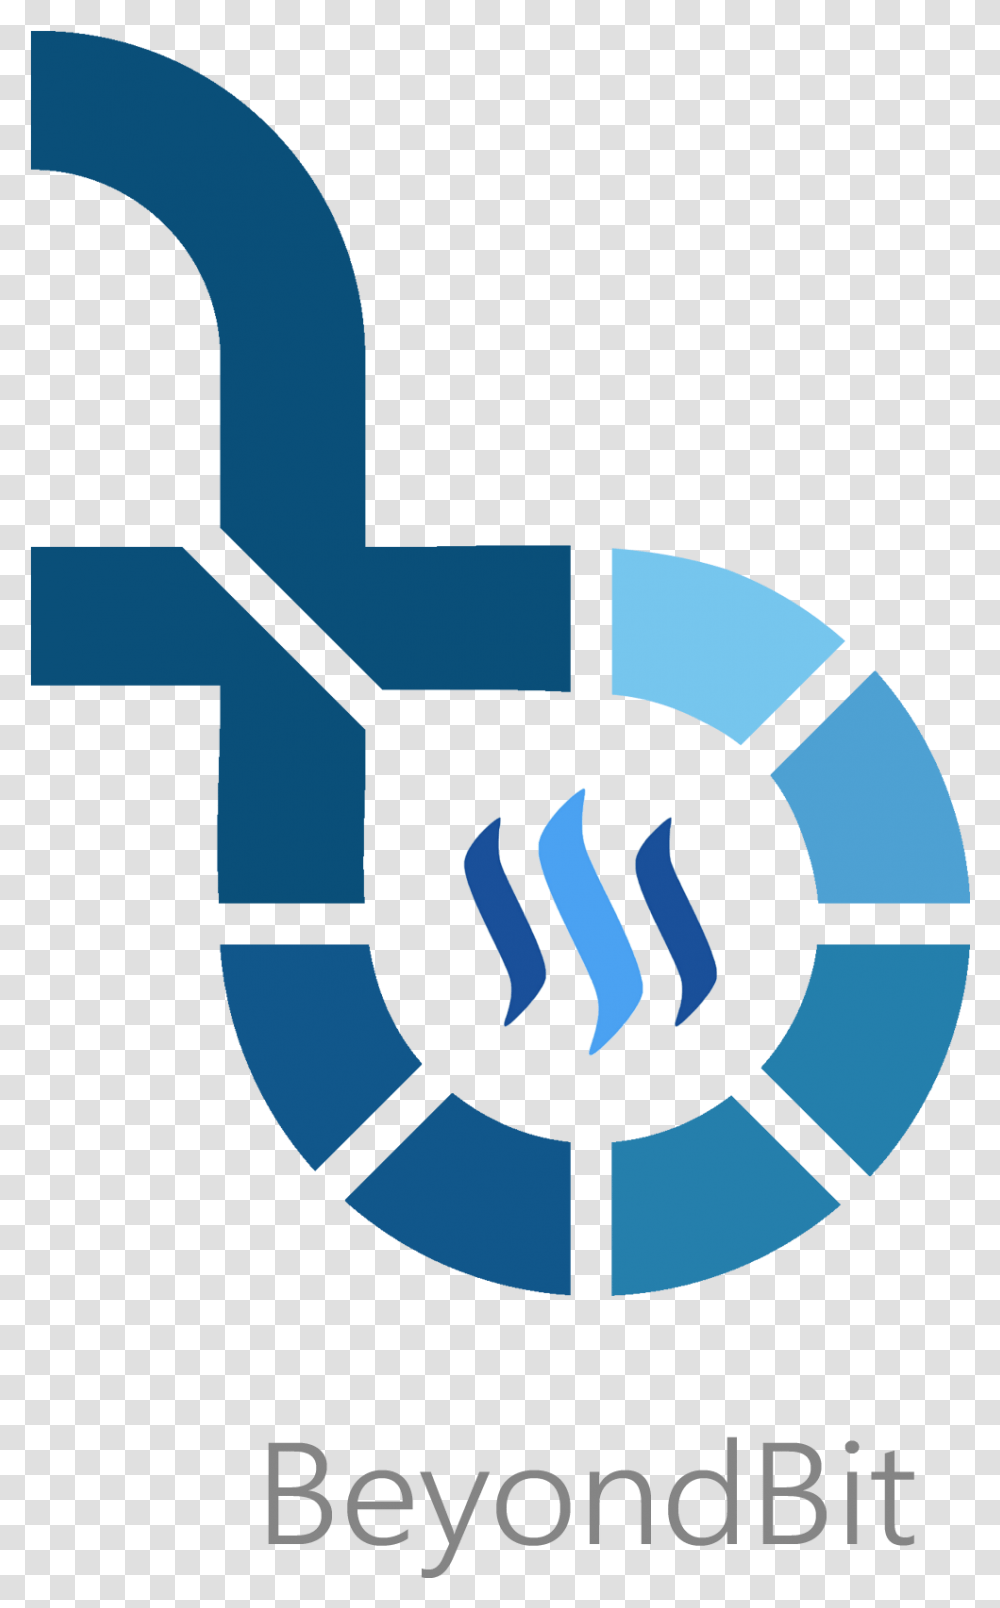 New Whaleshares Token Beyondbit Needs Logo My Lated Circle Icon For Presentation, Poster, Advertisement, Symbol, Armor Transparent Png